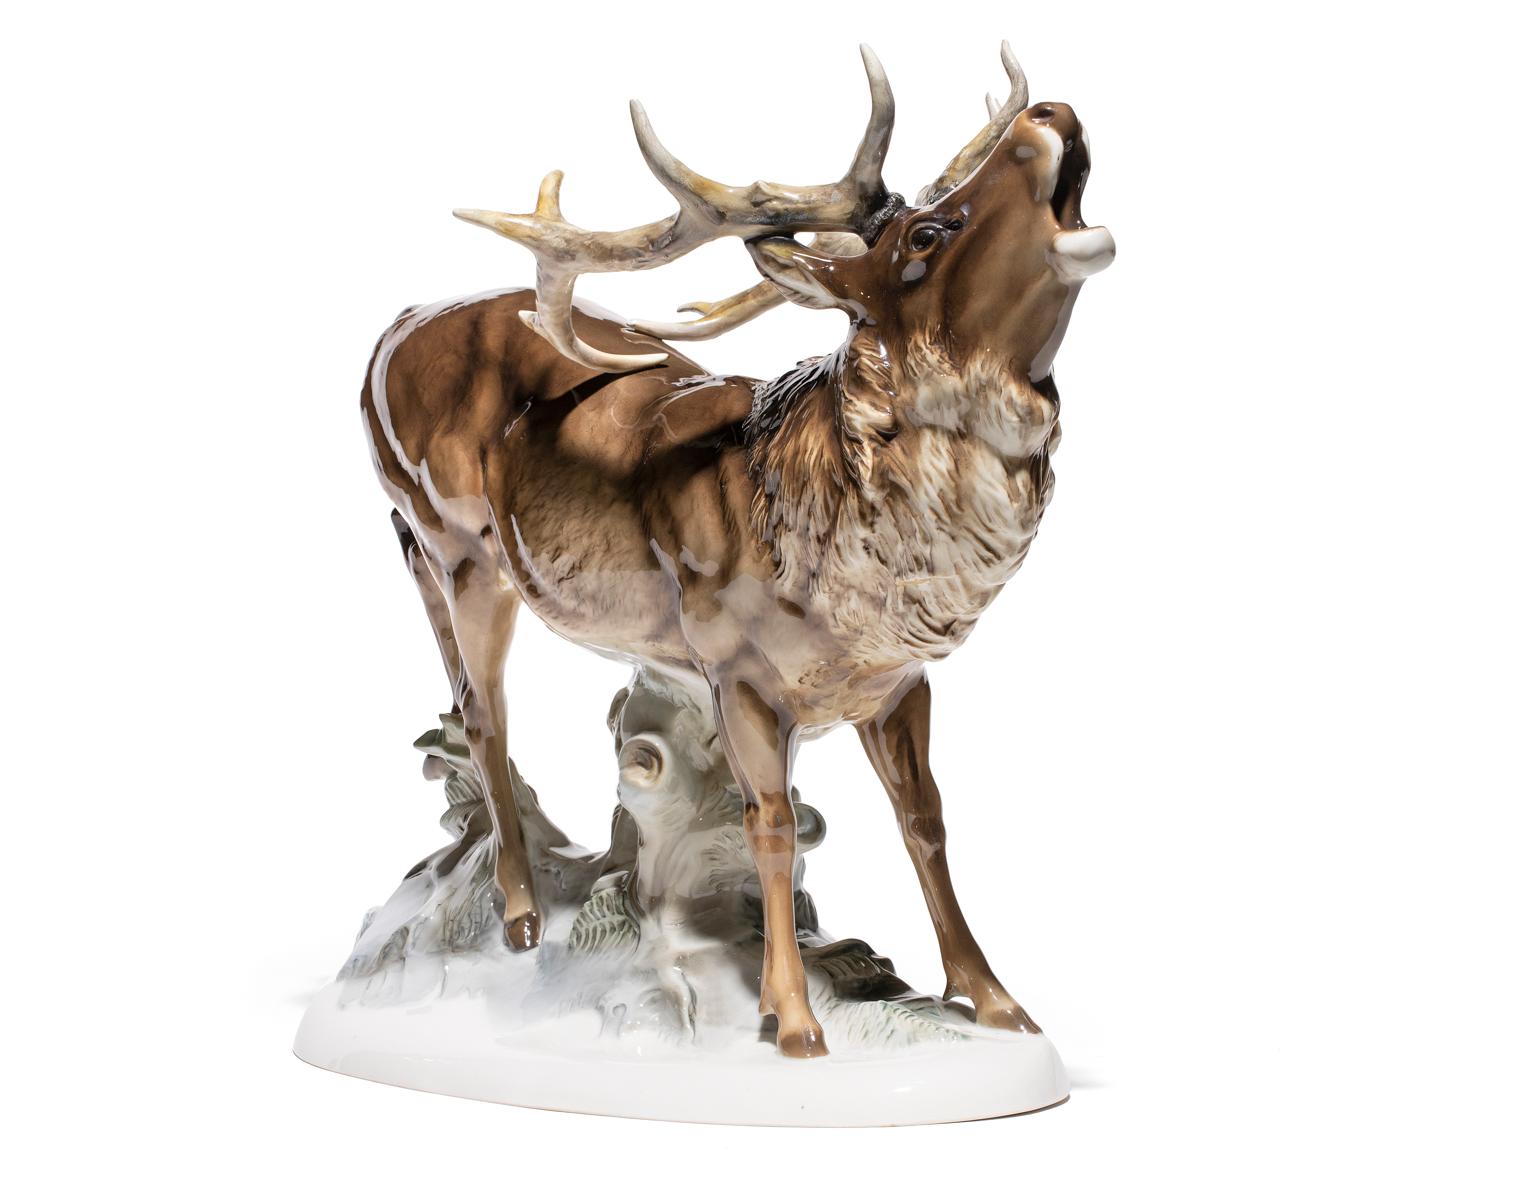 The Stag Deer porcelain has been manufactured by the Hutschenreuther - Selb - Kunstabteilung (art studio). The underside bears the authentic marks of the Hutschenreuther-Selb company. A Stag Deer is a fully grown, mature male deer. This one is